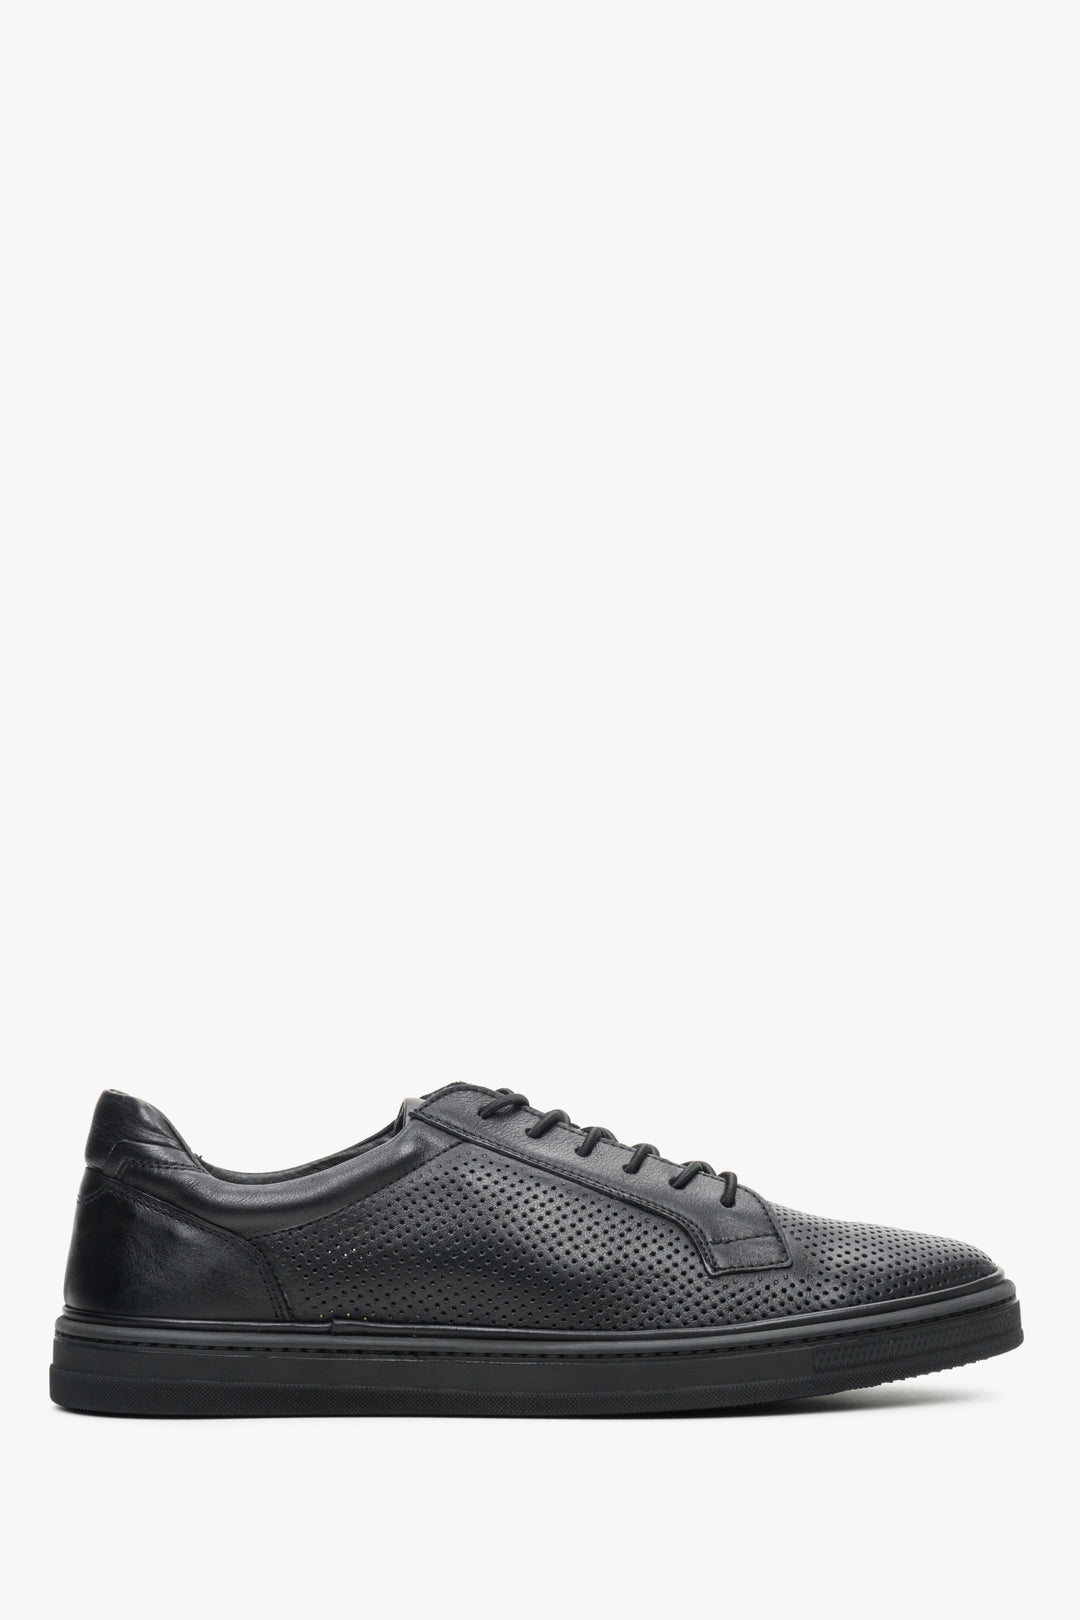 Black men's perforated sneakers for summer of Estro's new summer collection.